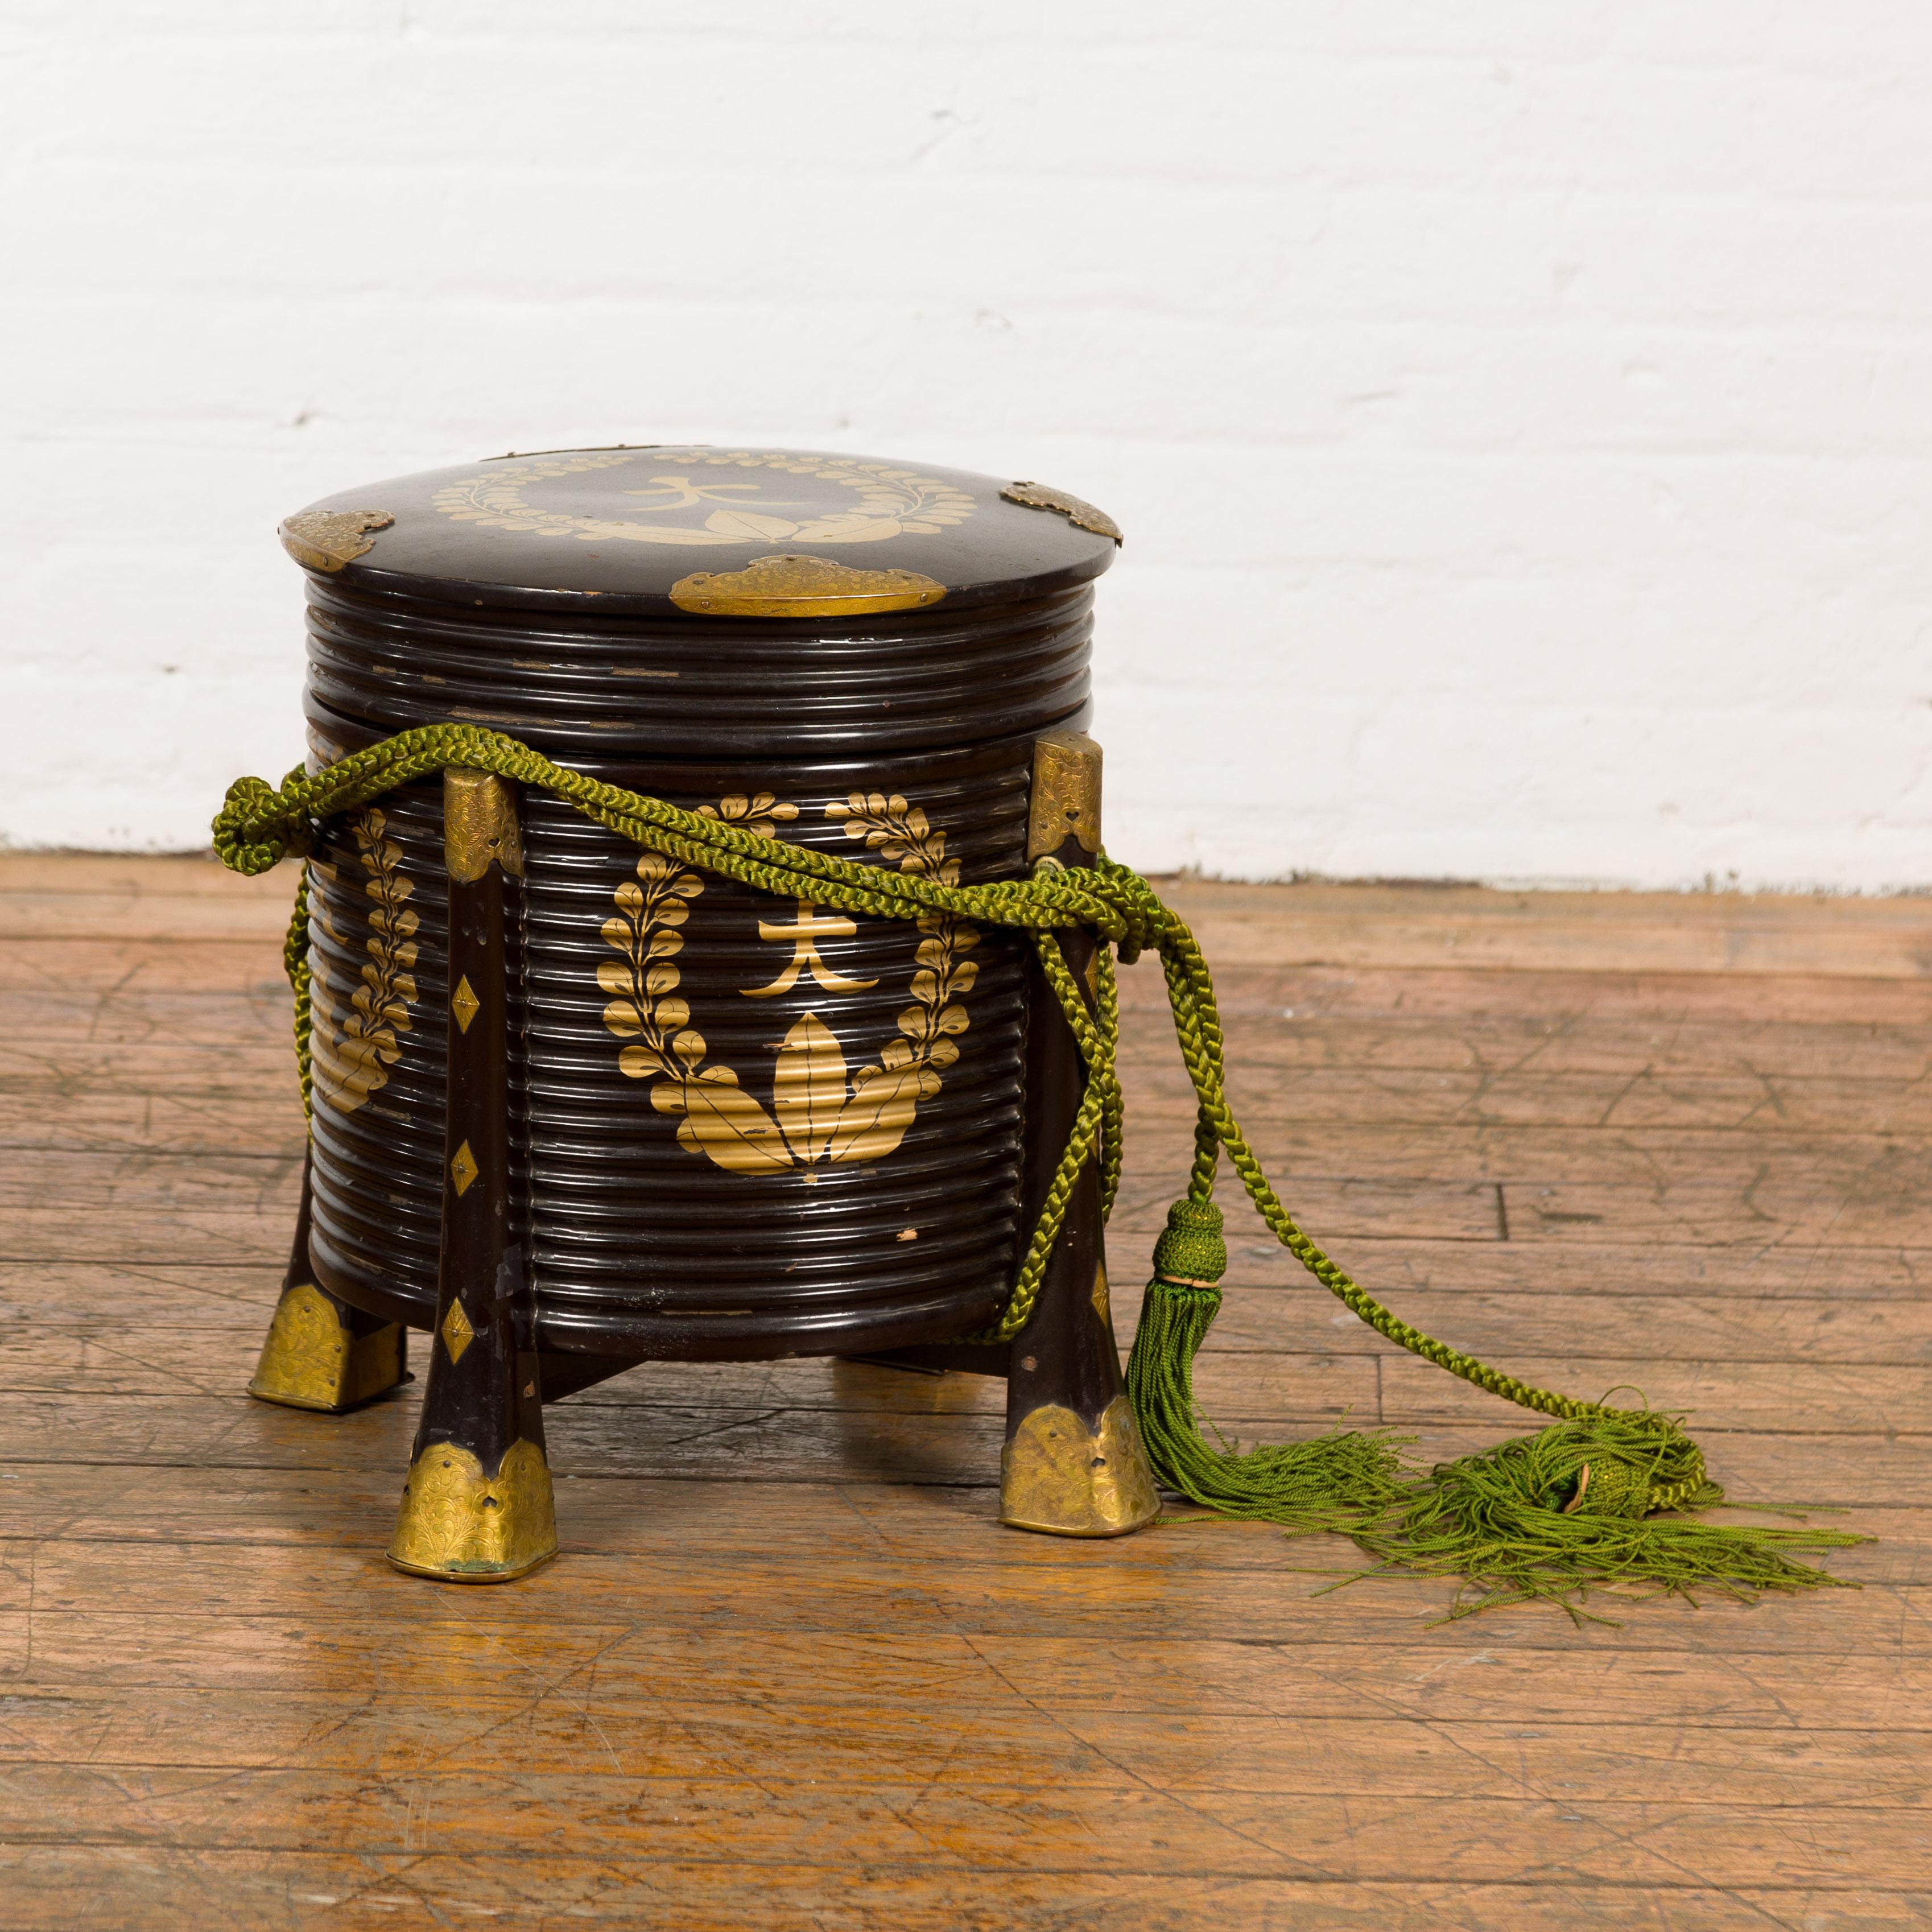 Japanese Meiji Period Hokai Lidded Box with Brass Accents and Original Rope For Sale 6